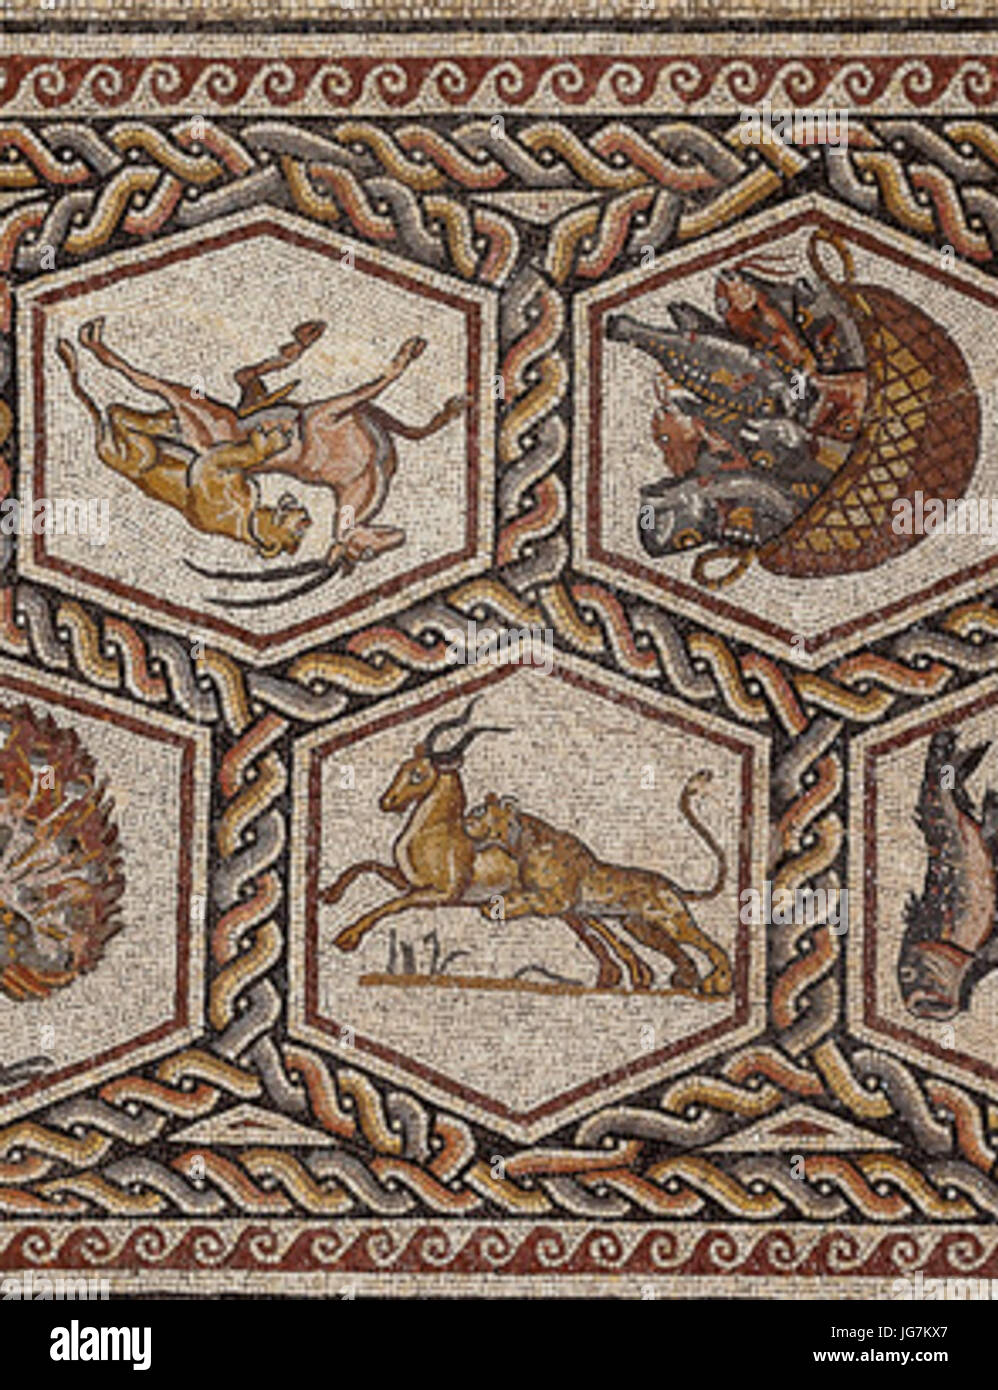 The Lod Mosaic 28detail29 Israel Antiquities Authority Stock Photo